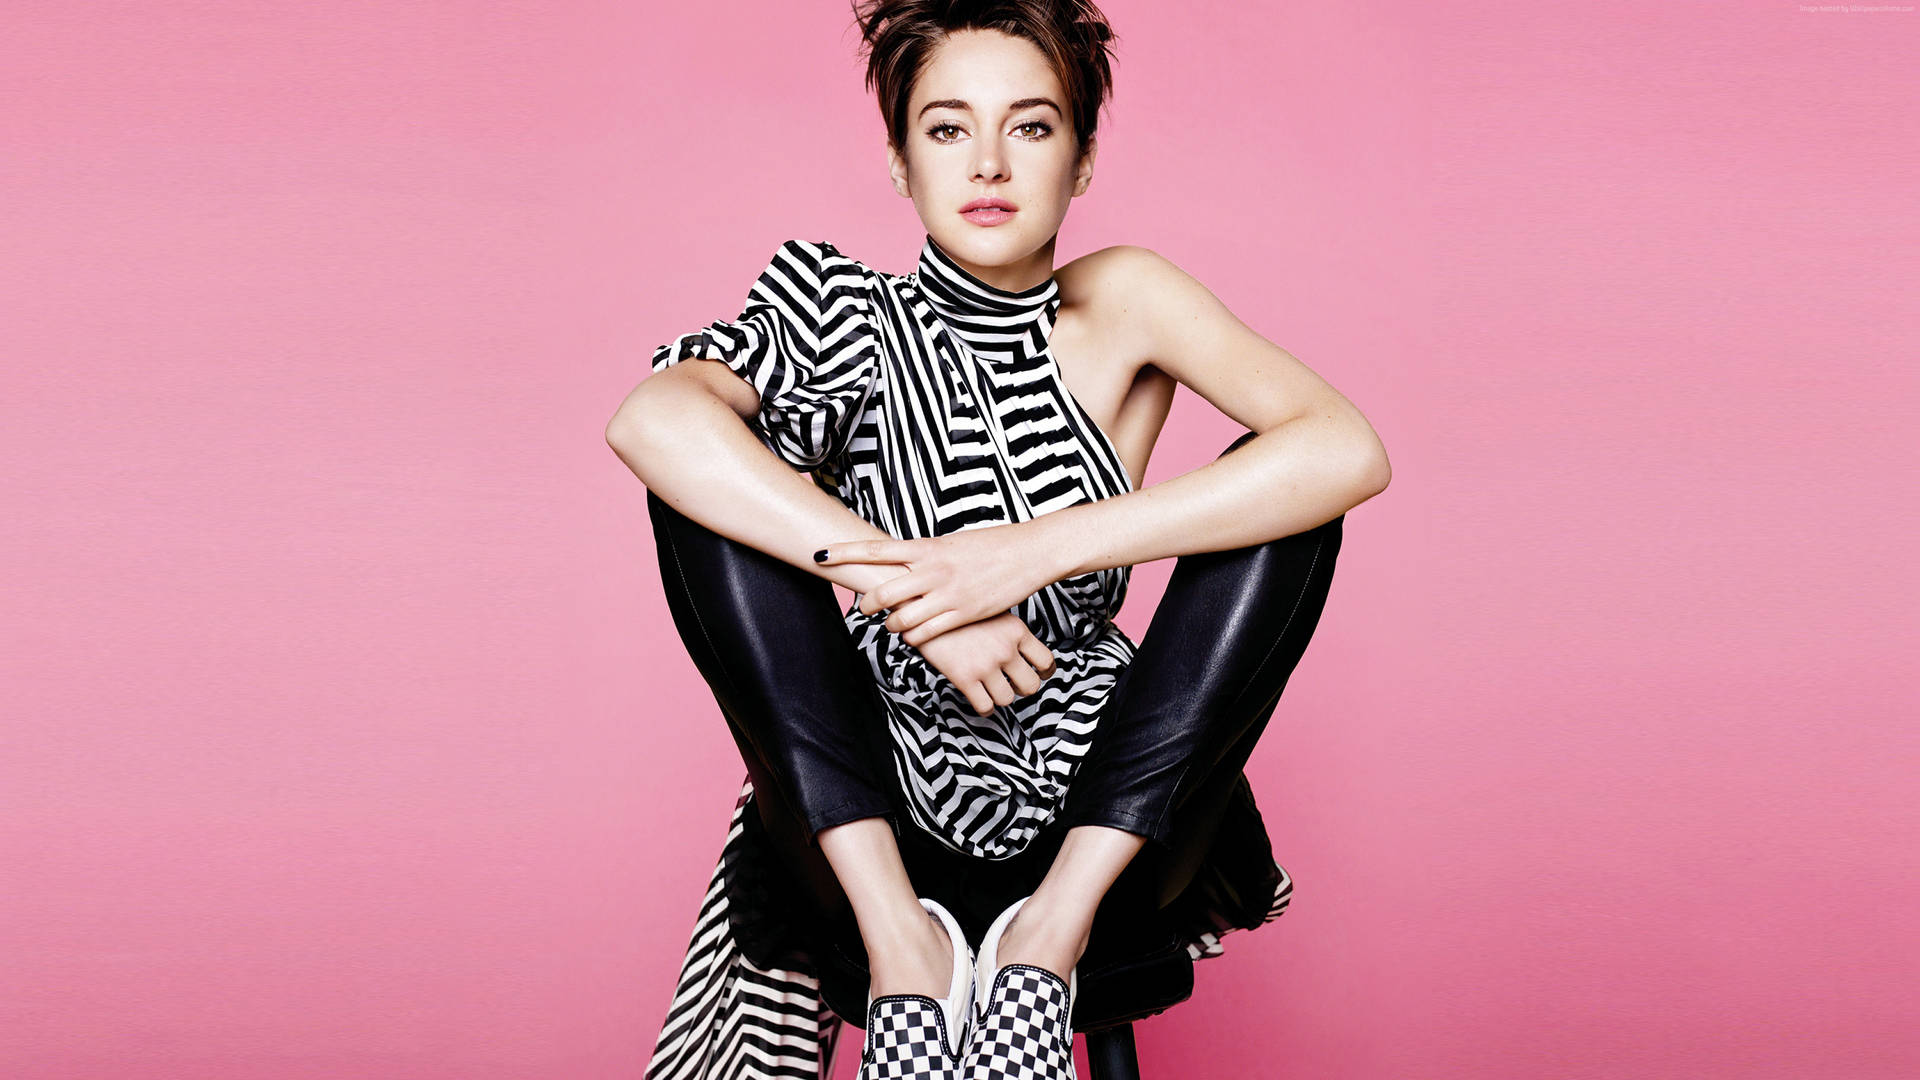 Shailene Woodley For Marie Claire Photoshoot Background